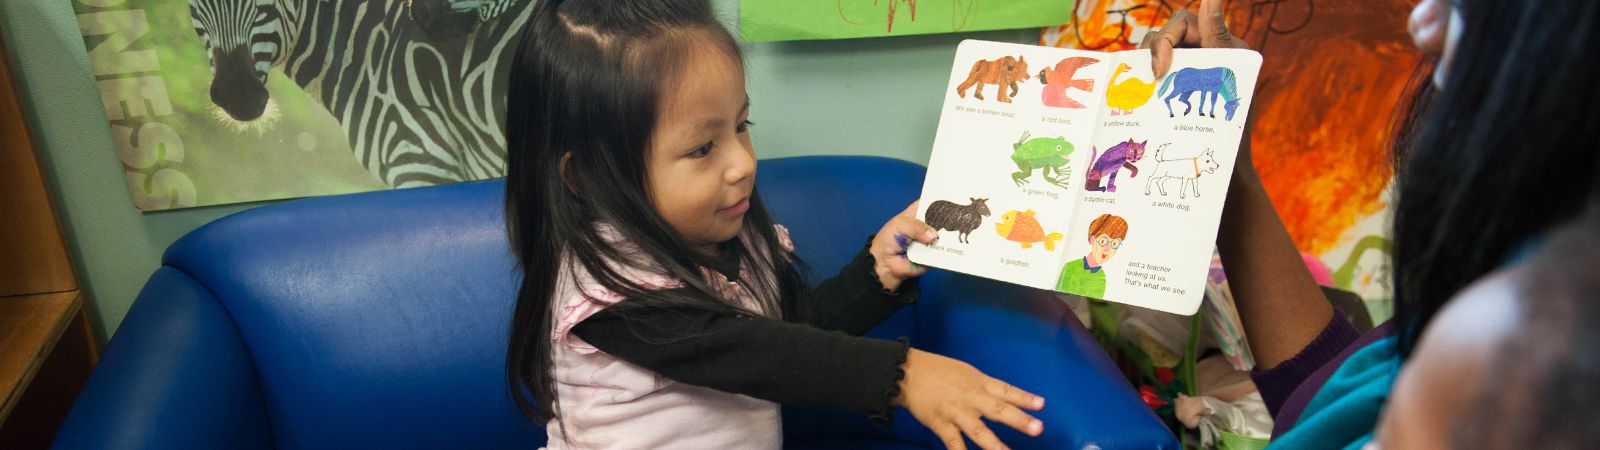 A little girl identifies the animals in a book.